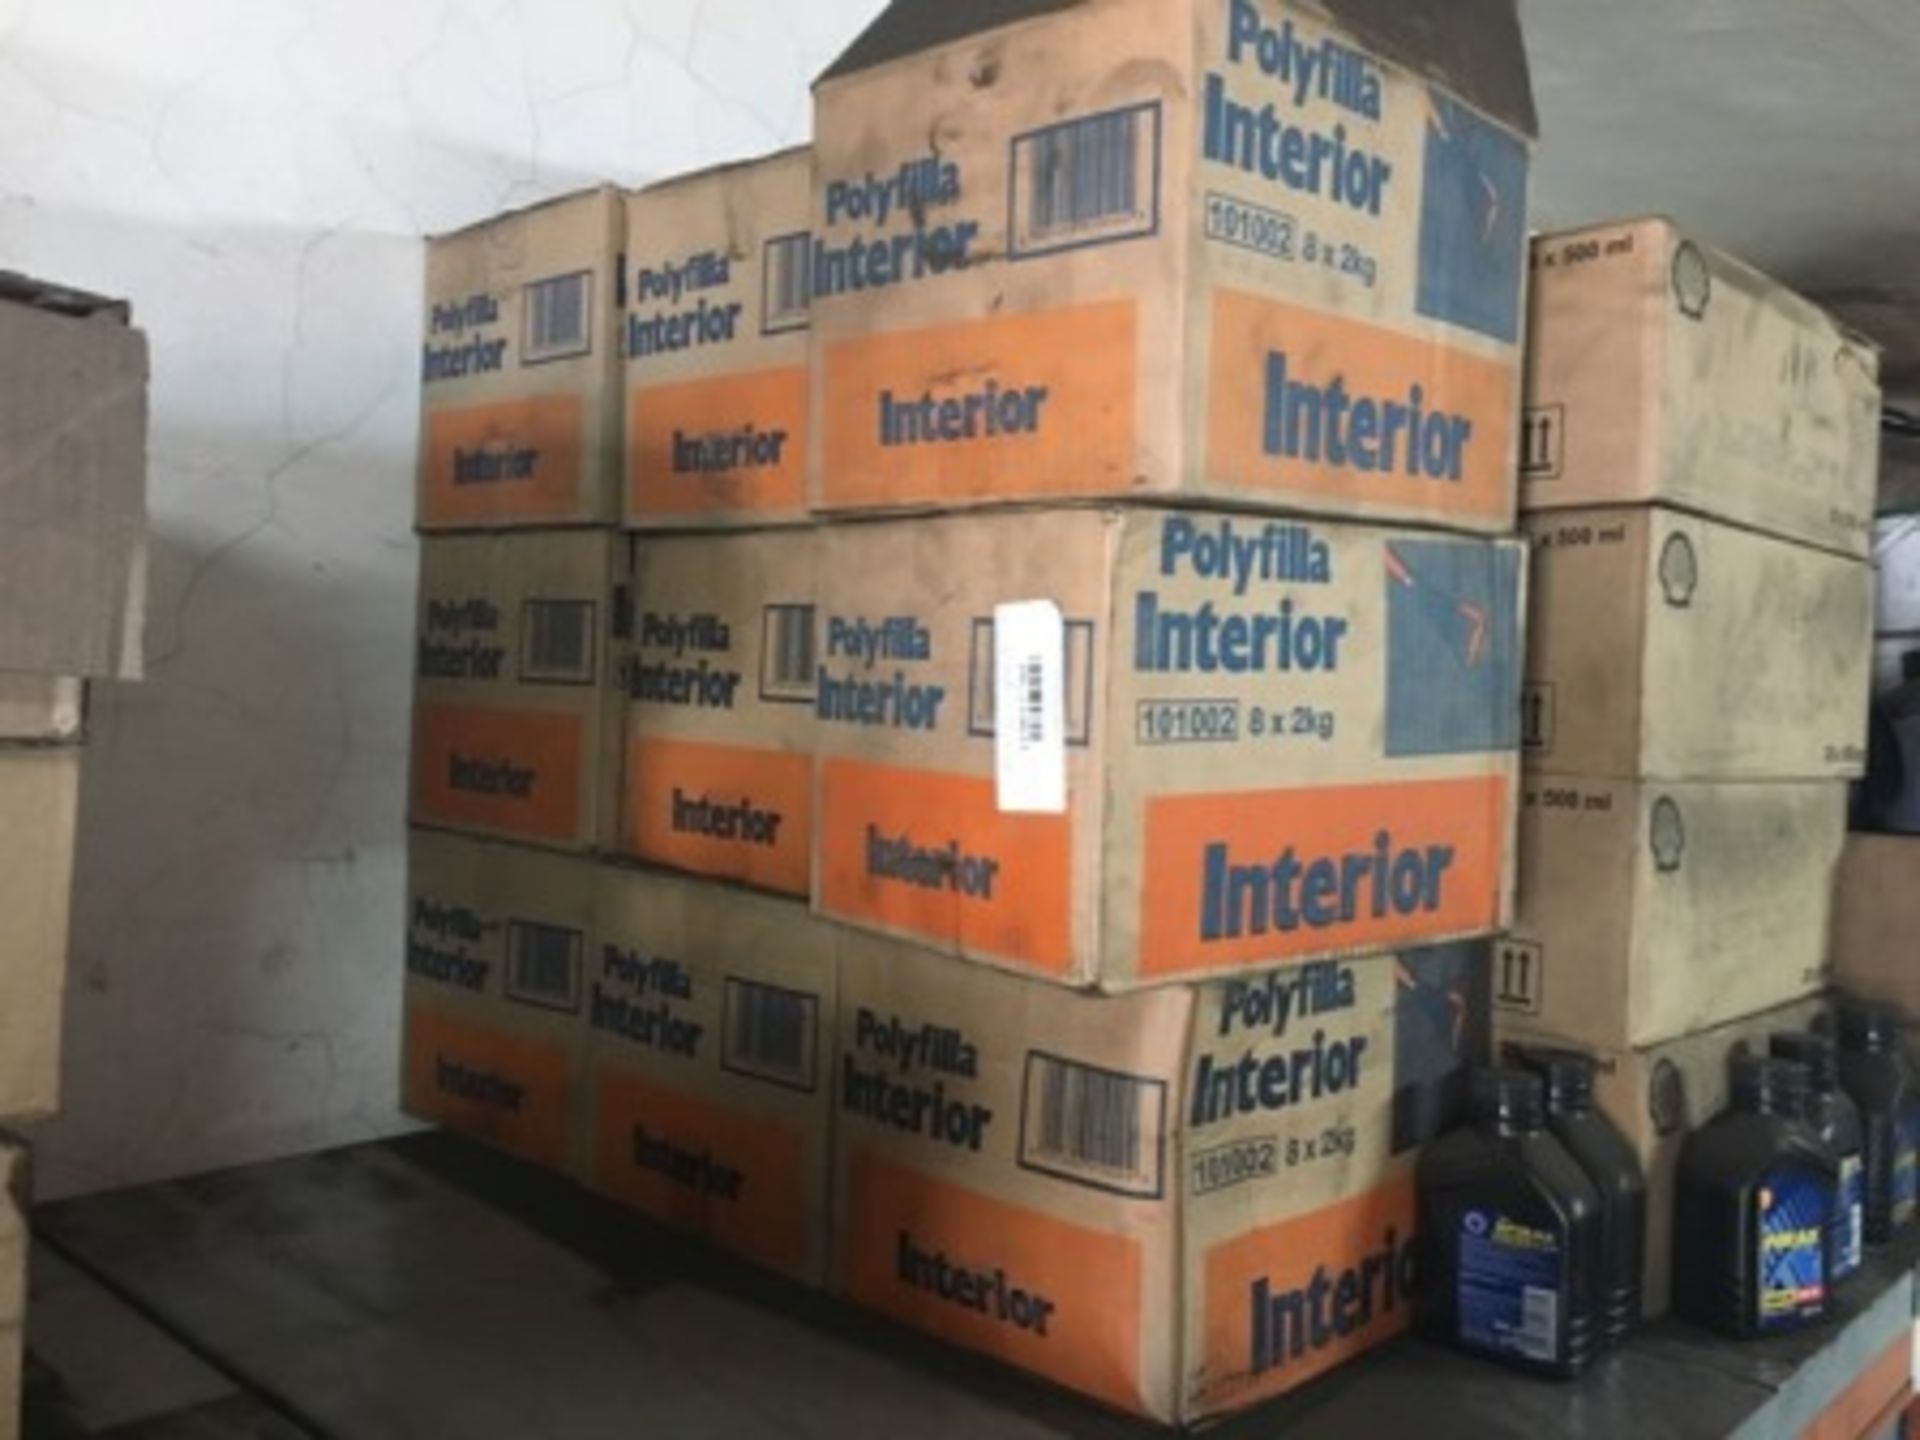 9 X BOXES POLLYFILLA INTERIOR CRACK FILLER - TO BE SOLD AS ONE LOT (MIDDELBURG, MPUMALANGA) - Image 2 of 2